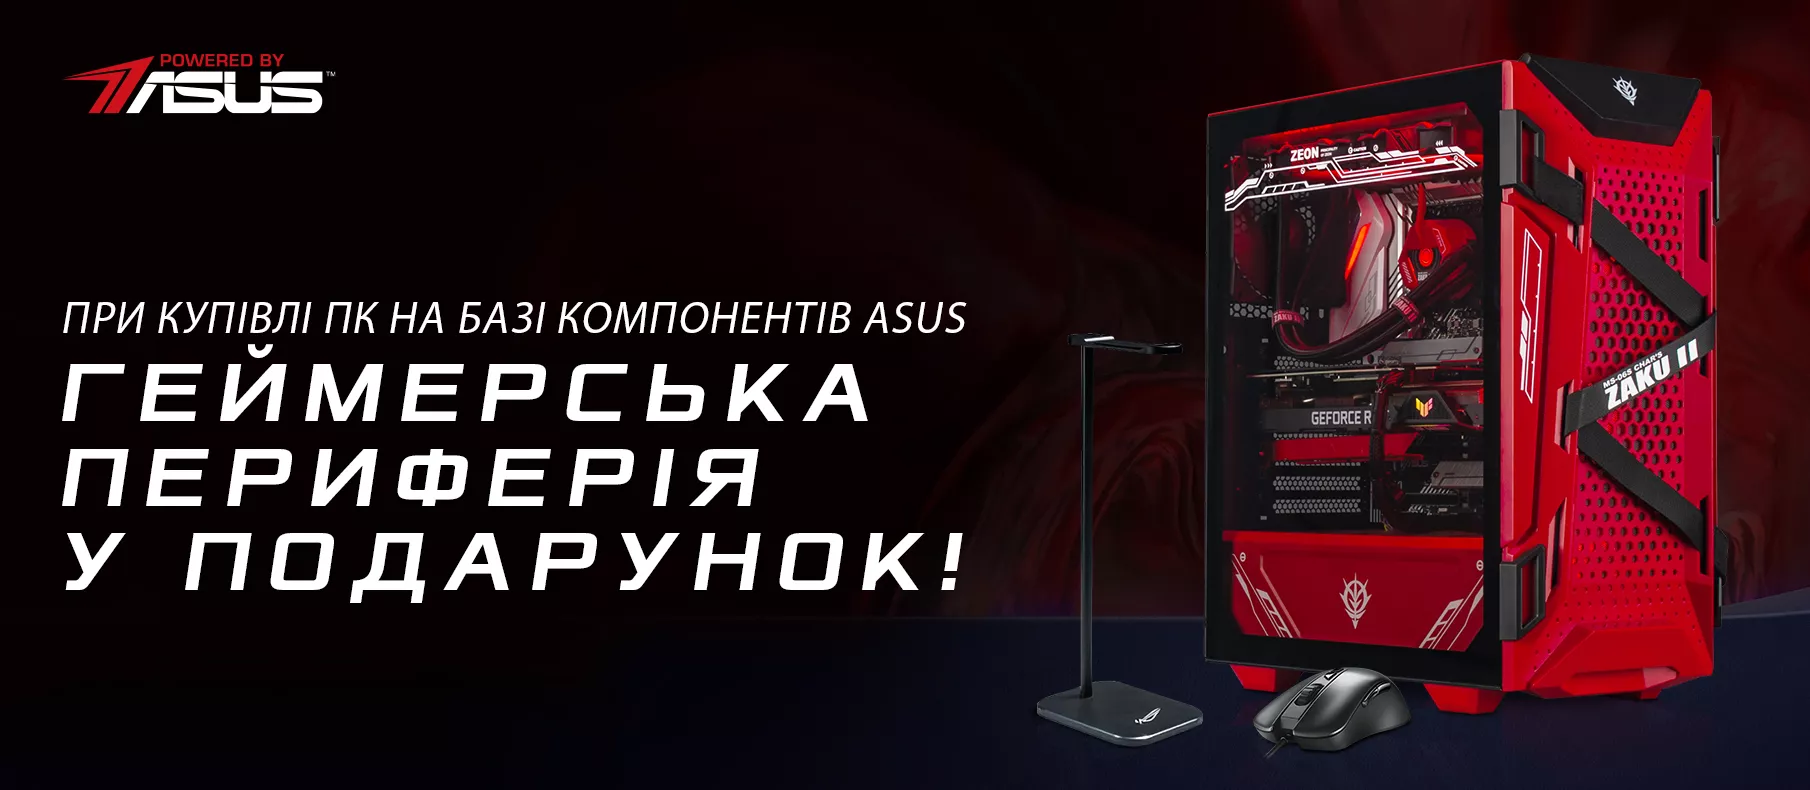 АКЦИЯ! - POWERED BY ASUS